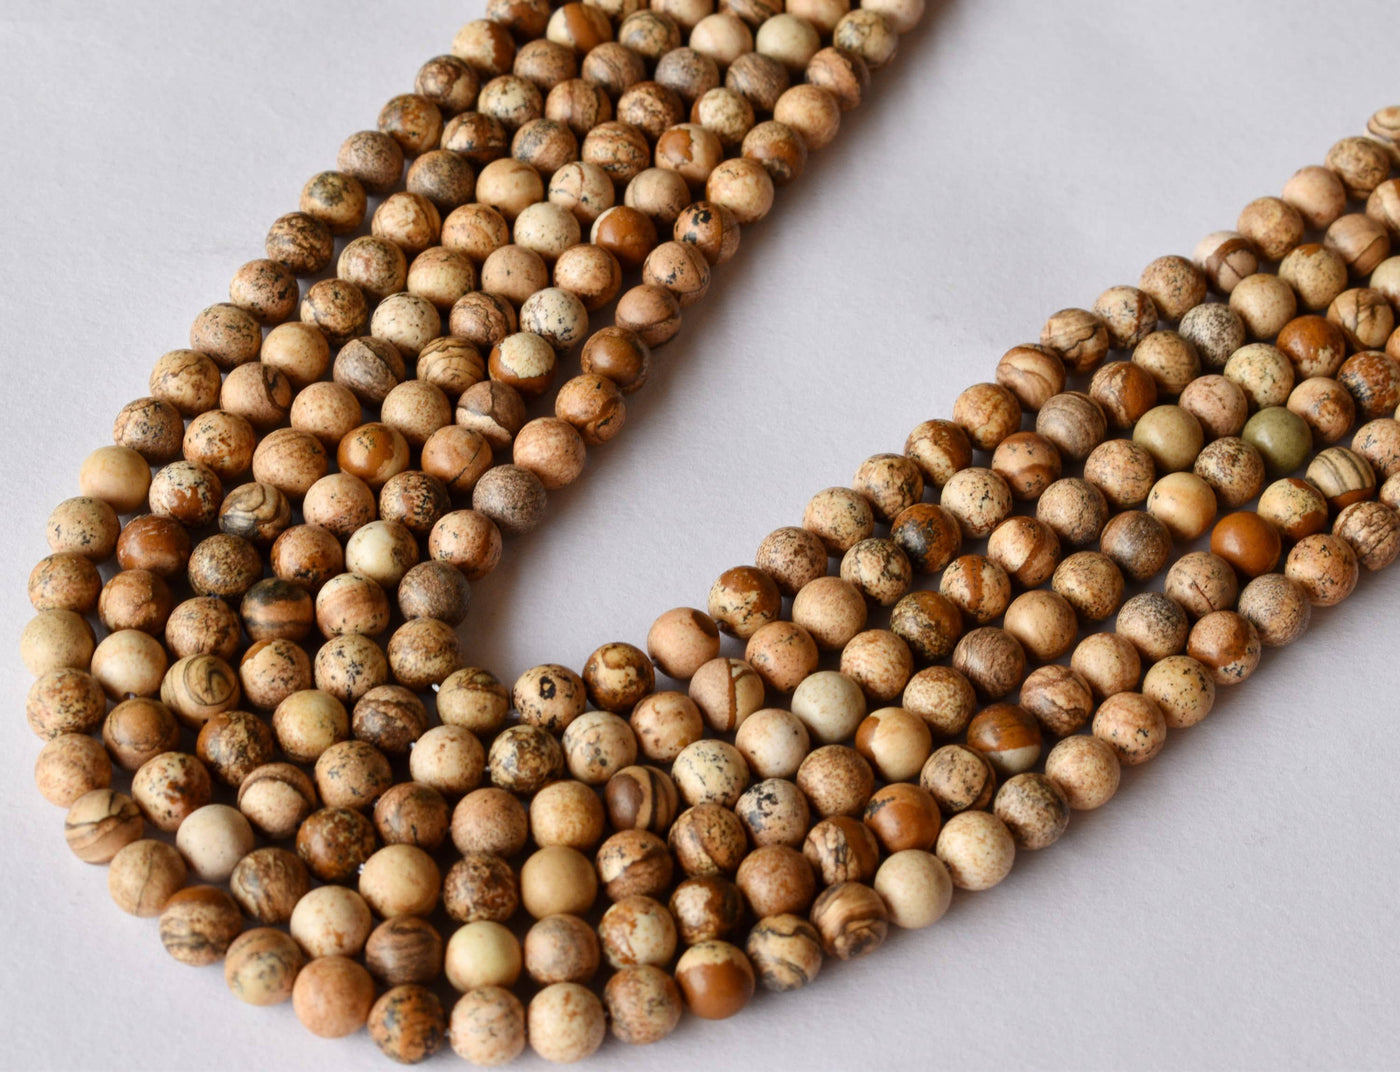 Picture Jasper Beads, Natural Round Crystal Beads 4mm to 12mm